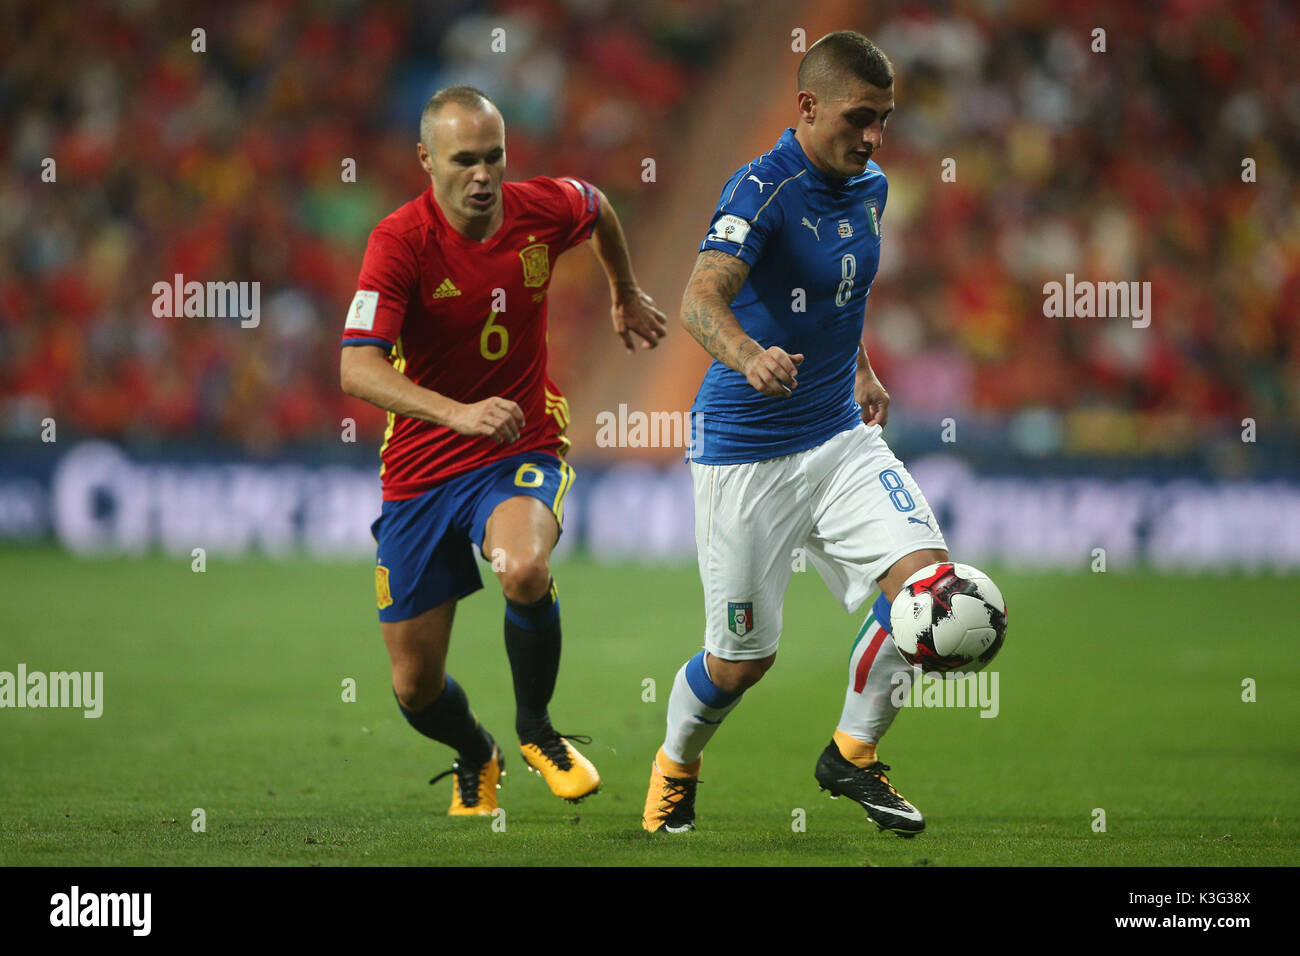 Madrid, Spain. 2nd September, 2017. World Cup qualifiers Russia 2018. Group G. Match between Spain vs Italy. Veratti and Iniesta in action during the match. Credit: Independent Photo Agency Srl/Alamy Live News Stock Photo